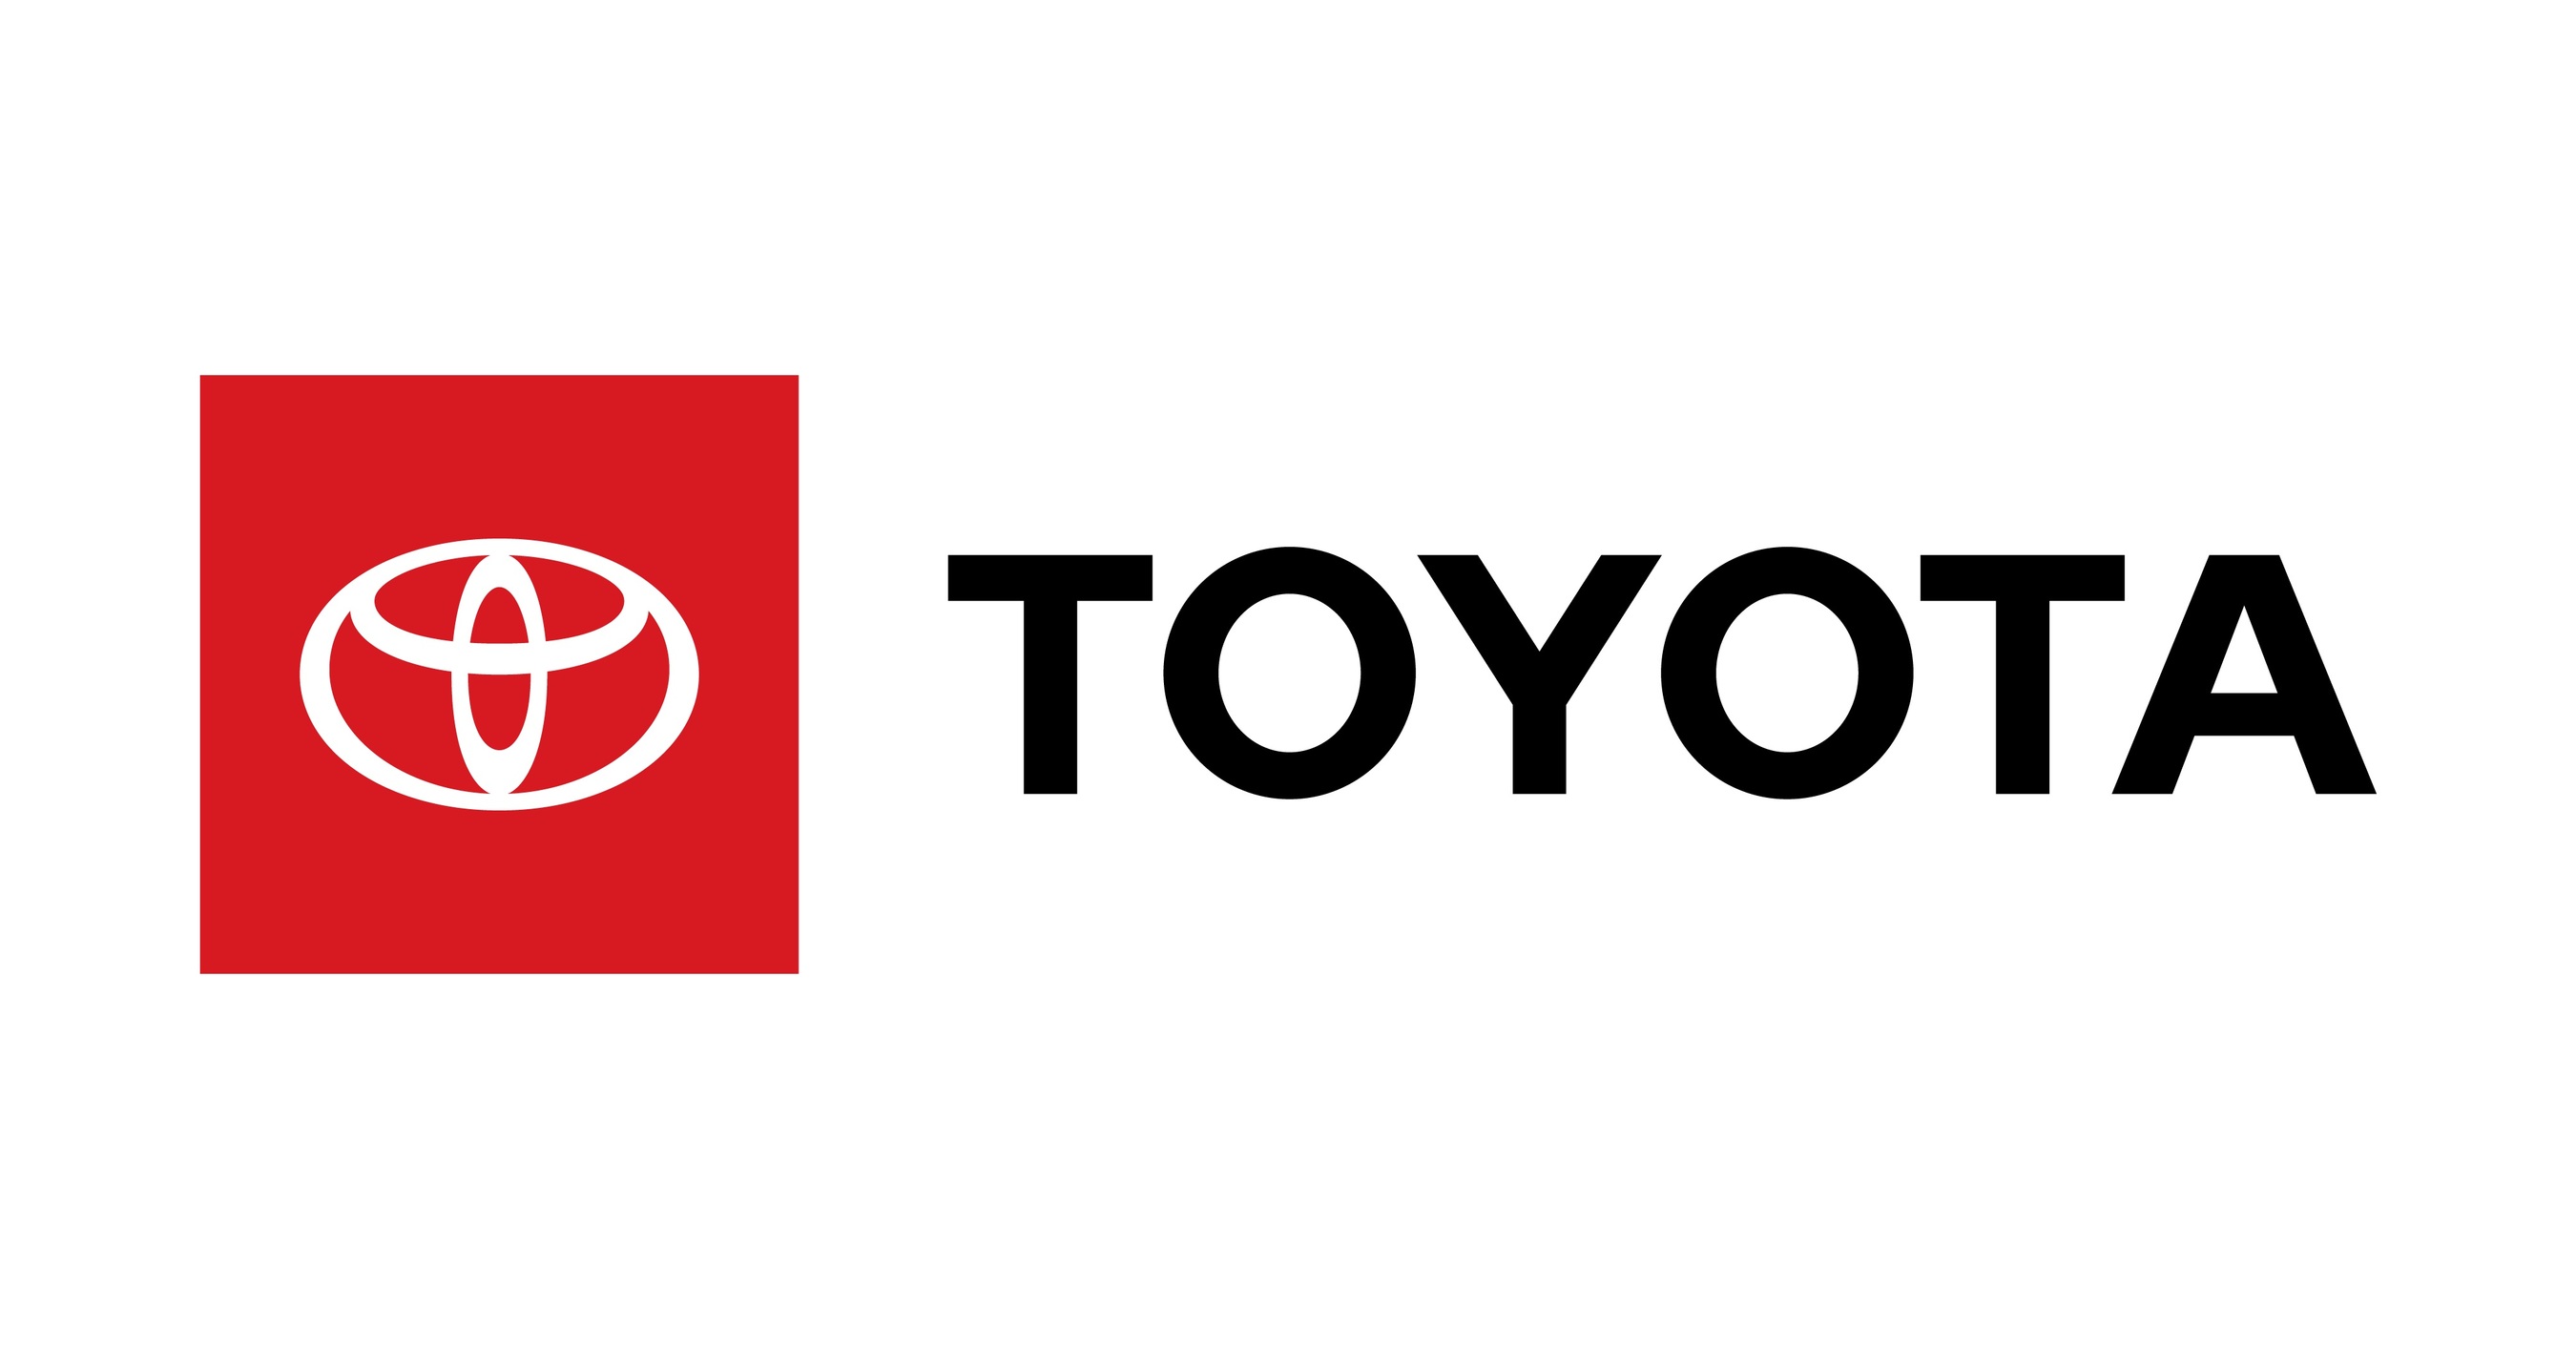 Toyota Launches All-New Crown Sport in Japan, Toyota